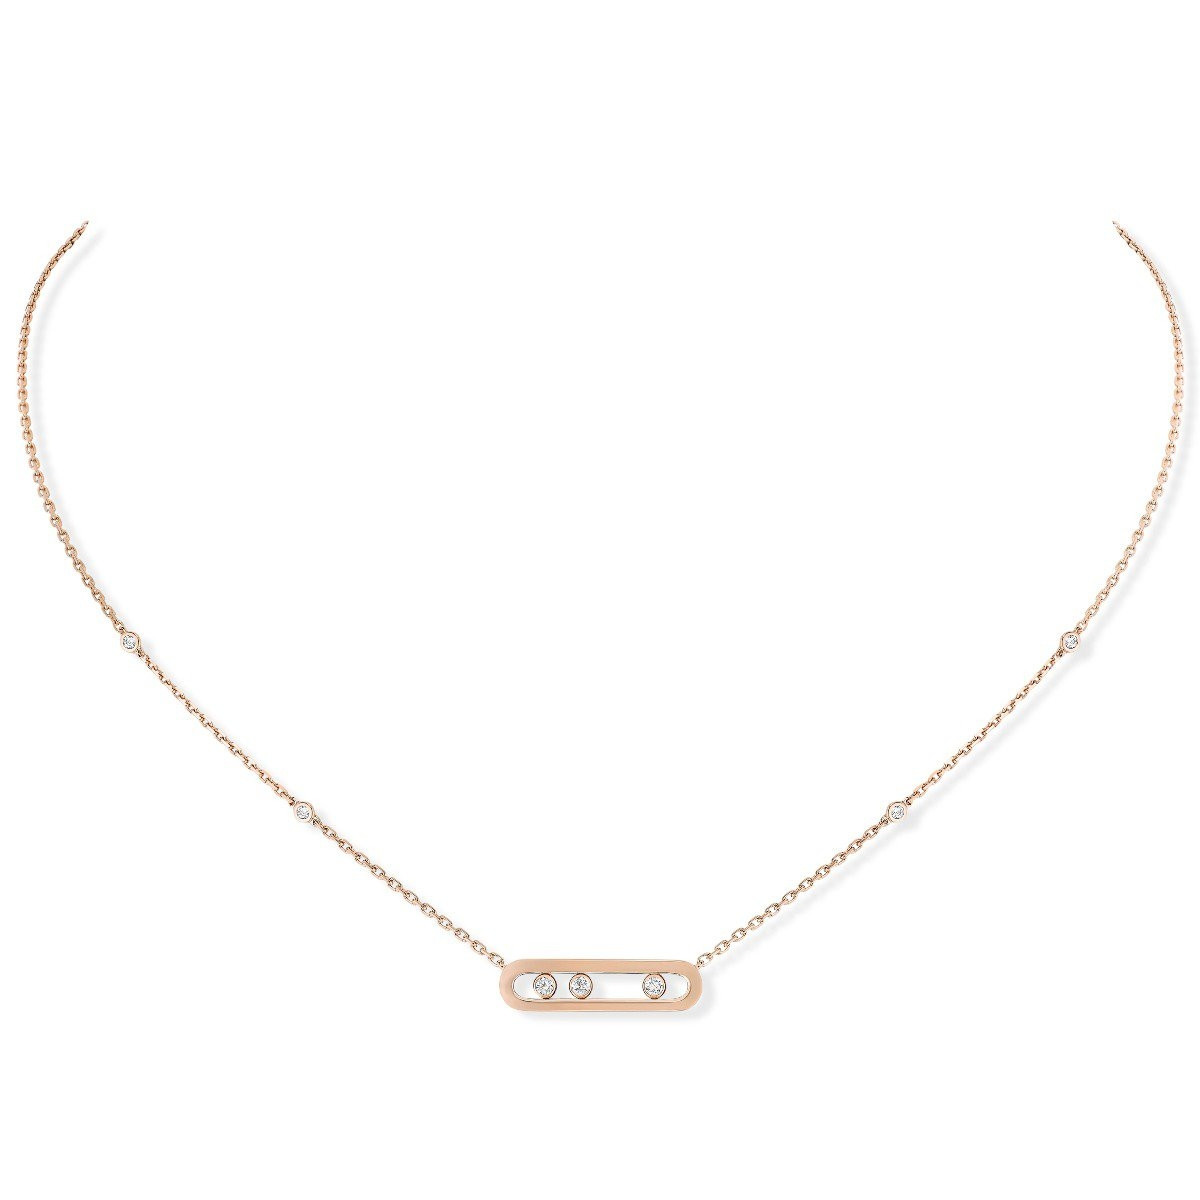 Messika Baby Move Plain Cage Diamond Necklace in 18K Gold front view